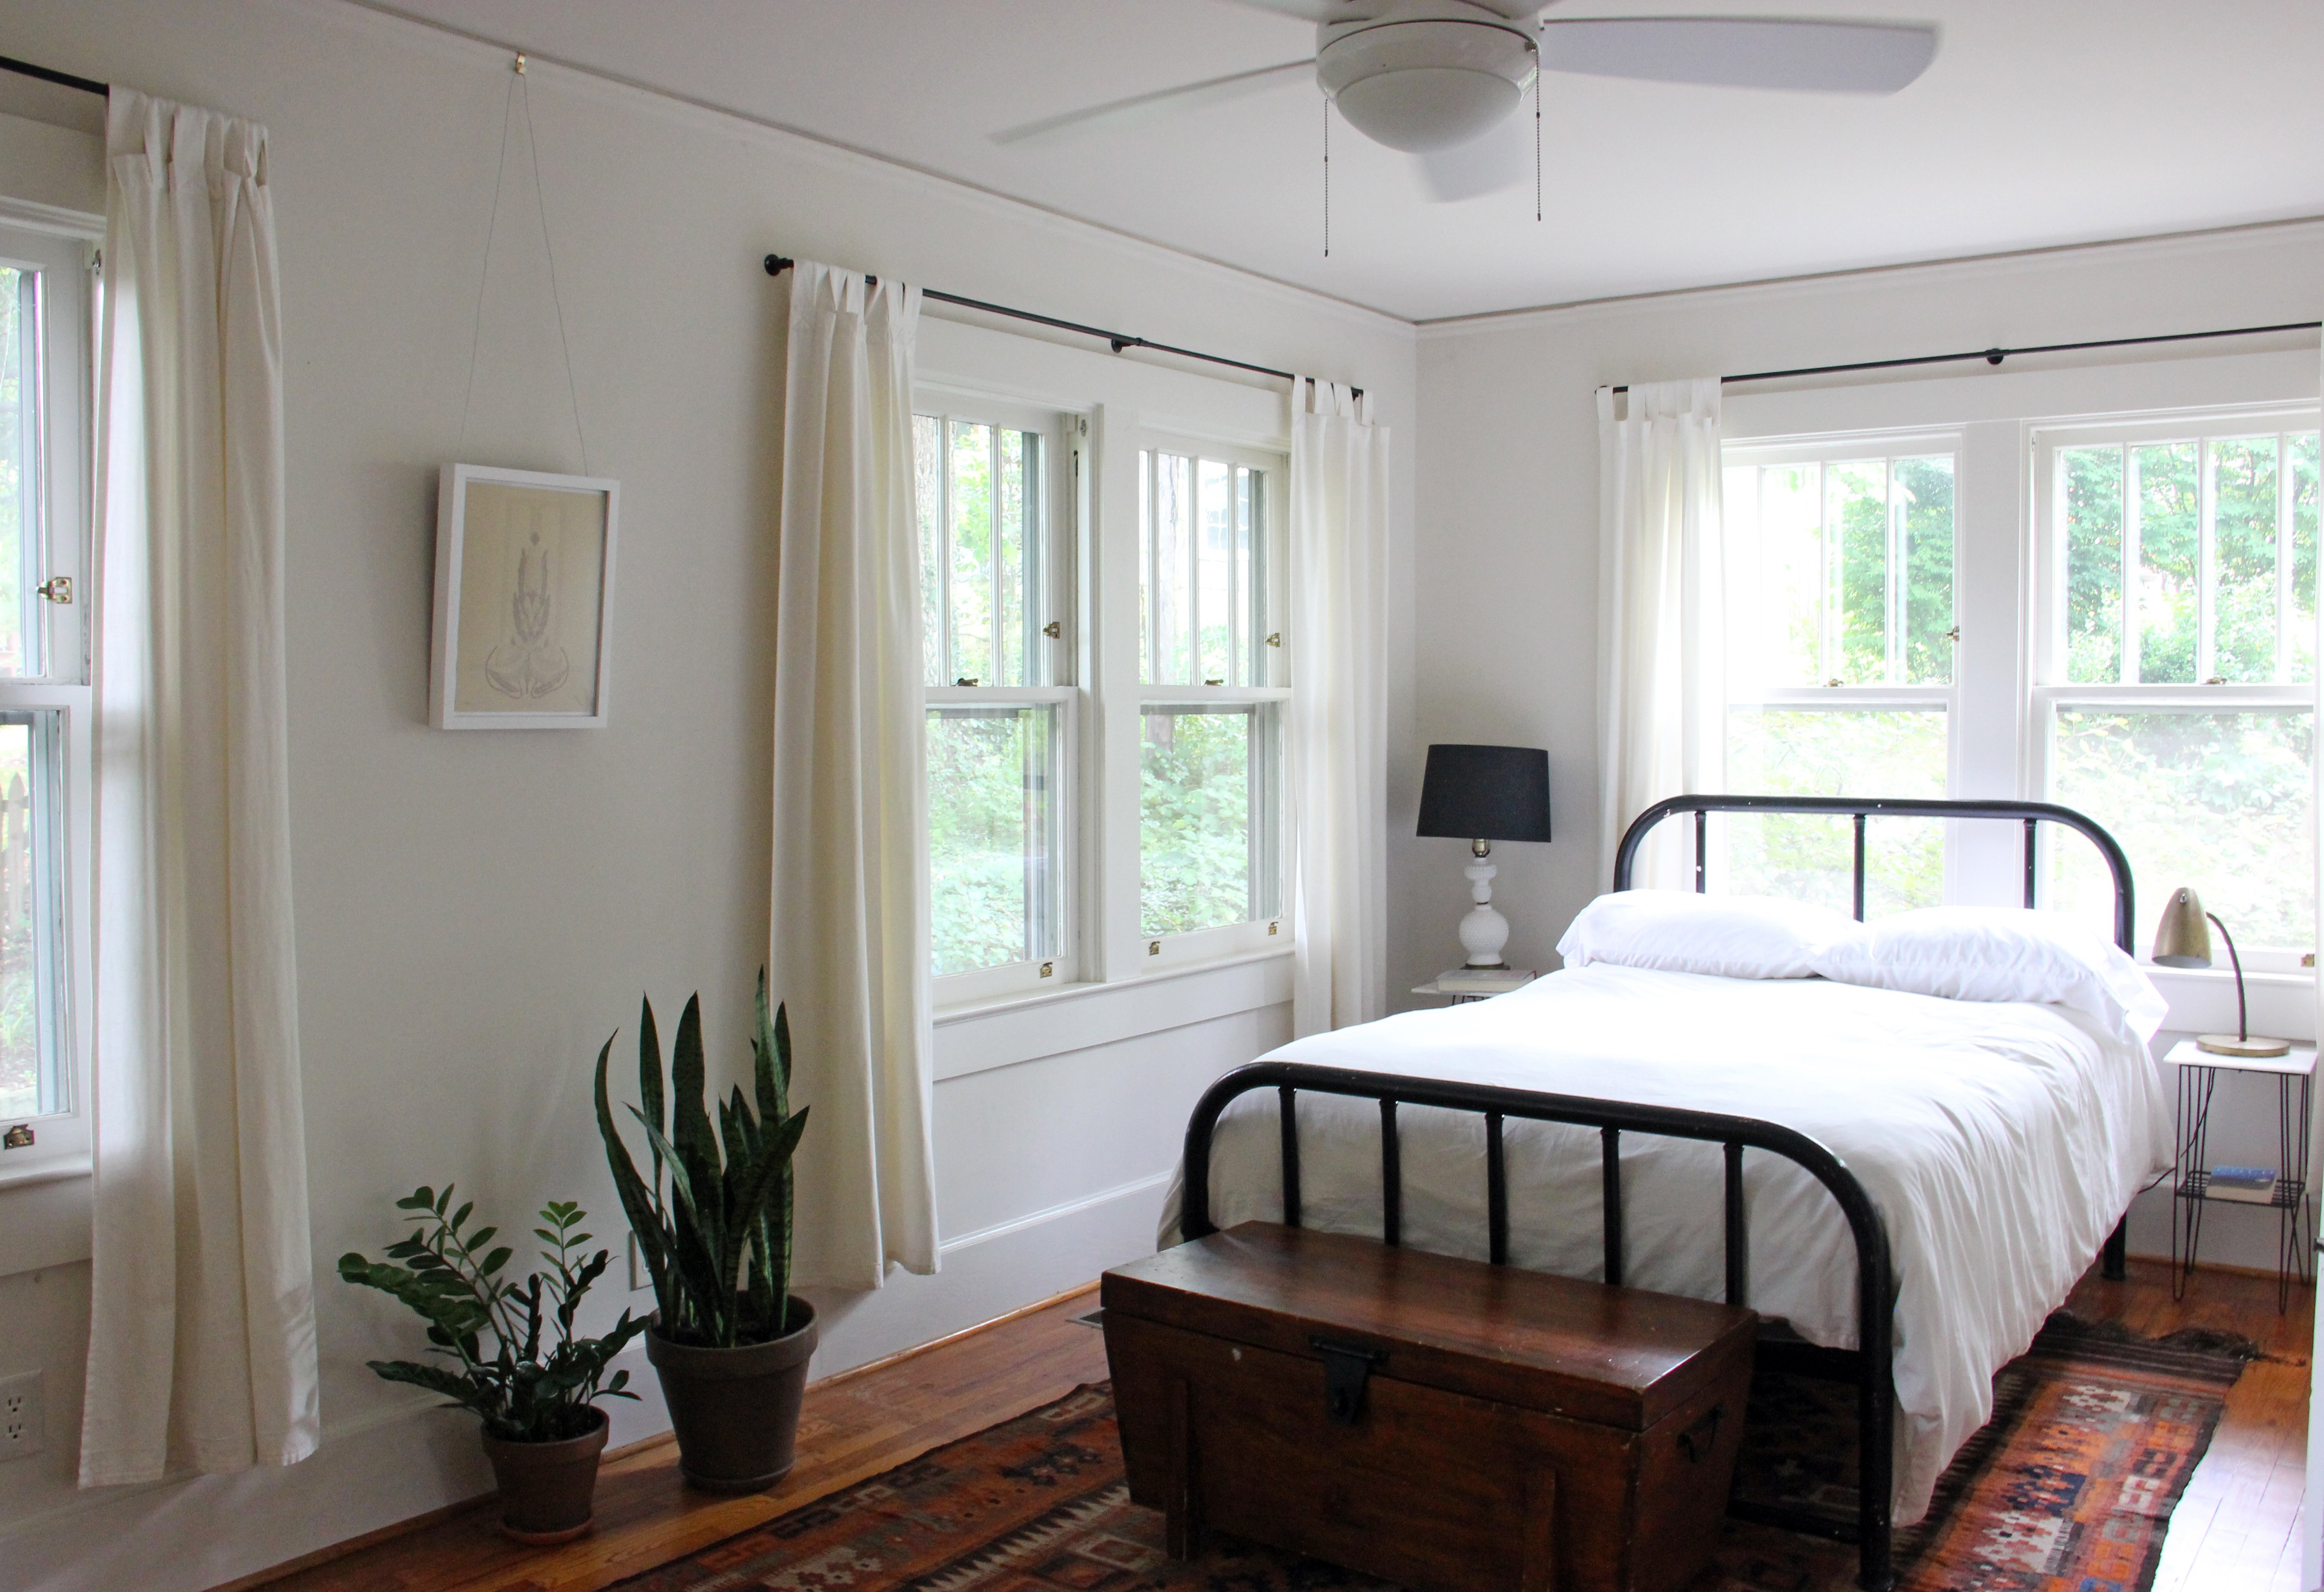 18 Easy Ways to Hang Curtains Without Drilling Into Walls ...